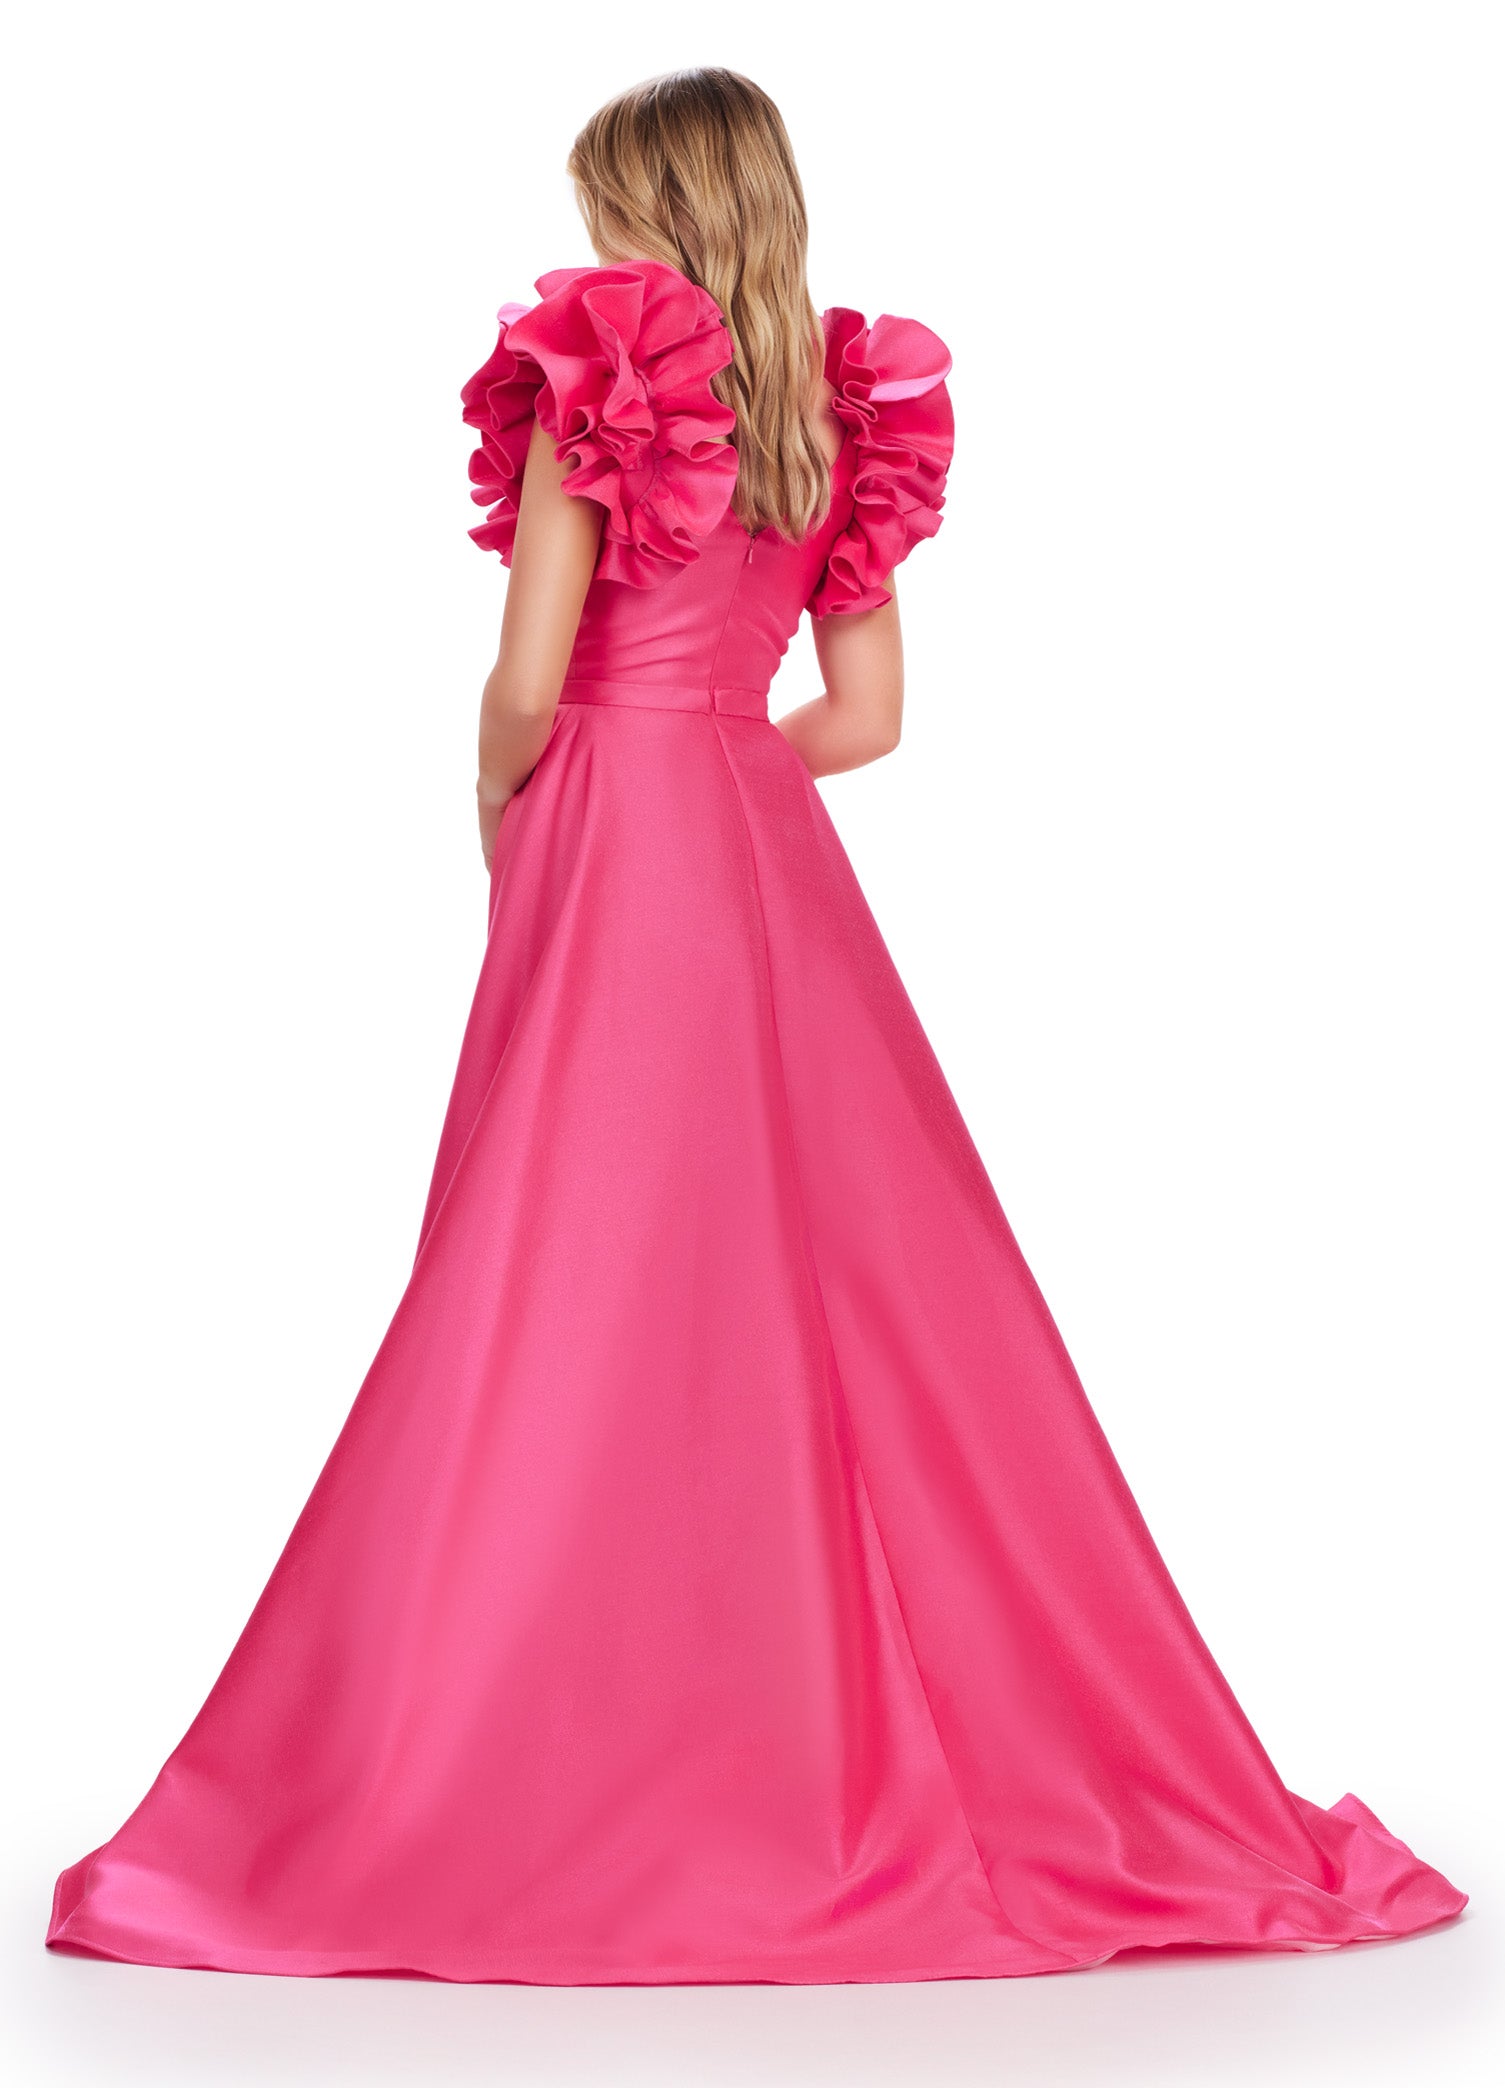 This Ashley Lauren 11610 Long Prom Dress boasts a V-neck and flattering ball gown silhouette in luxurious mikado fabric. The oversized ruffles add a touch of drama to this formal piece, perfect for pageants and other special occasions. Sleek and eye-catching, this dress is sure to make you stand out in any crowd. We're here for the drama! This A-line Mikado gown features a V-neckline and dramatic ruffle sleeves with a slit.